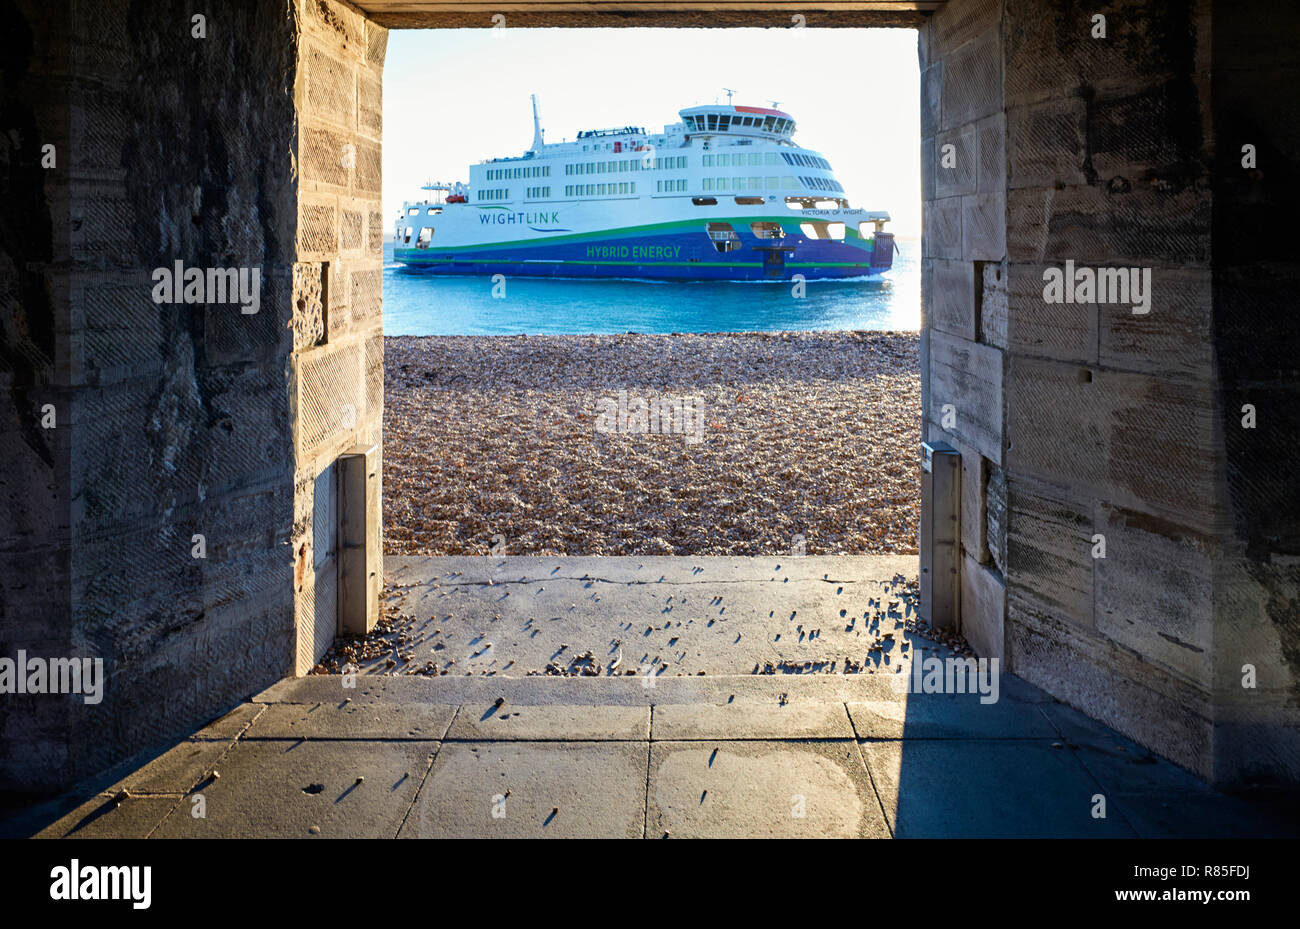 Wightlink car ferry ‘Victoria of Wight’ framed in doorway at Sally Port near the entrance to Portsmouth Harbour Stock Photo